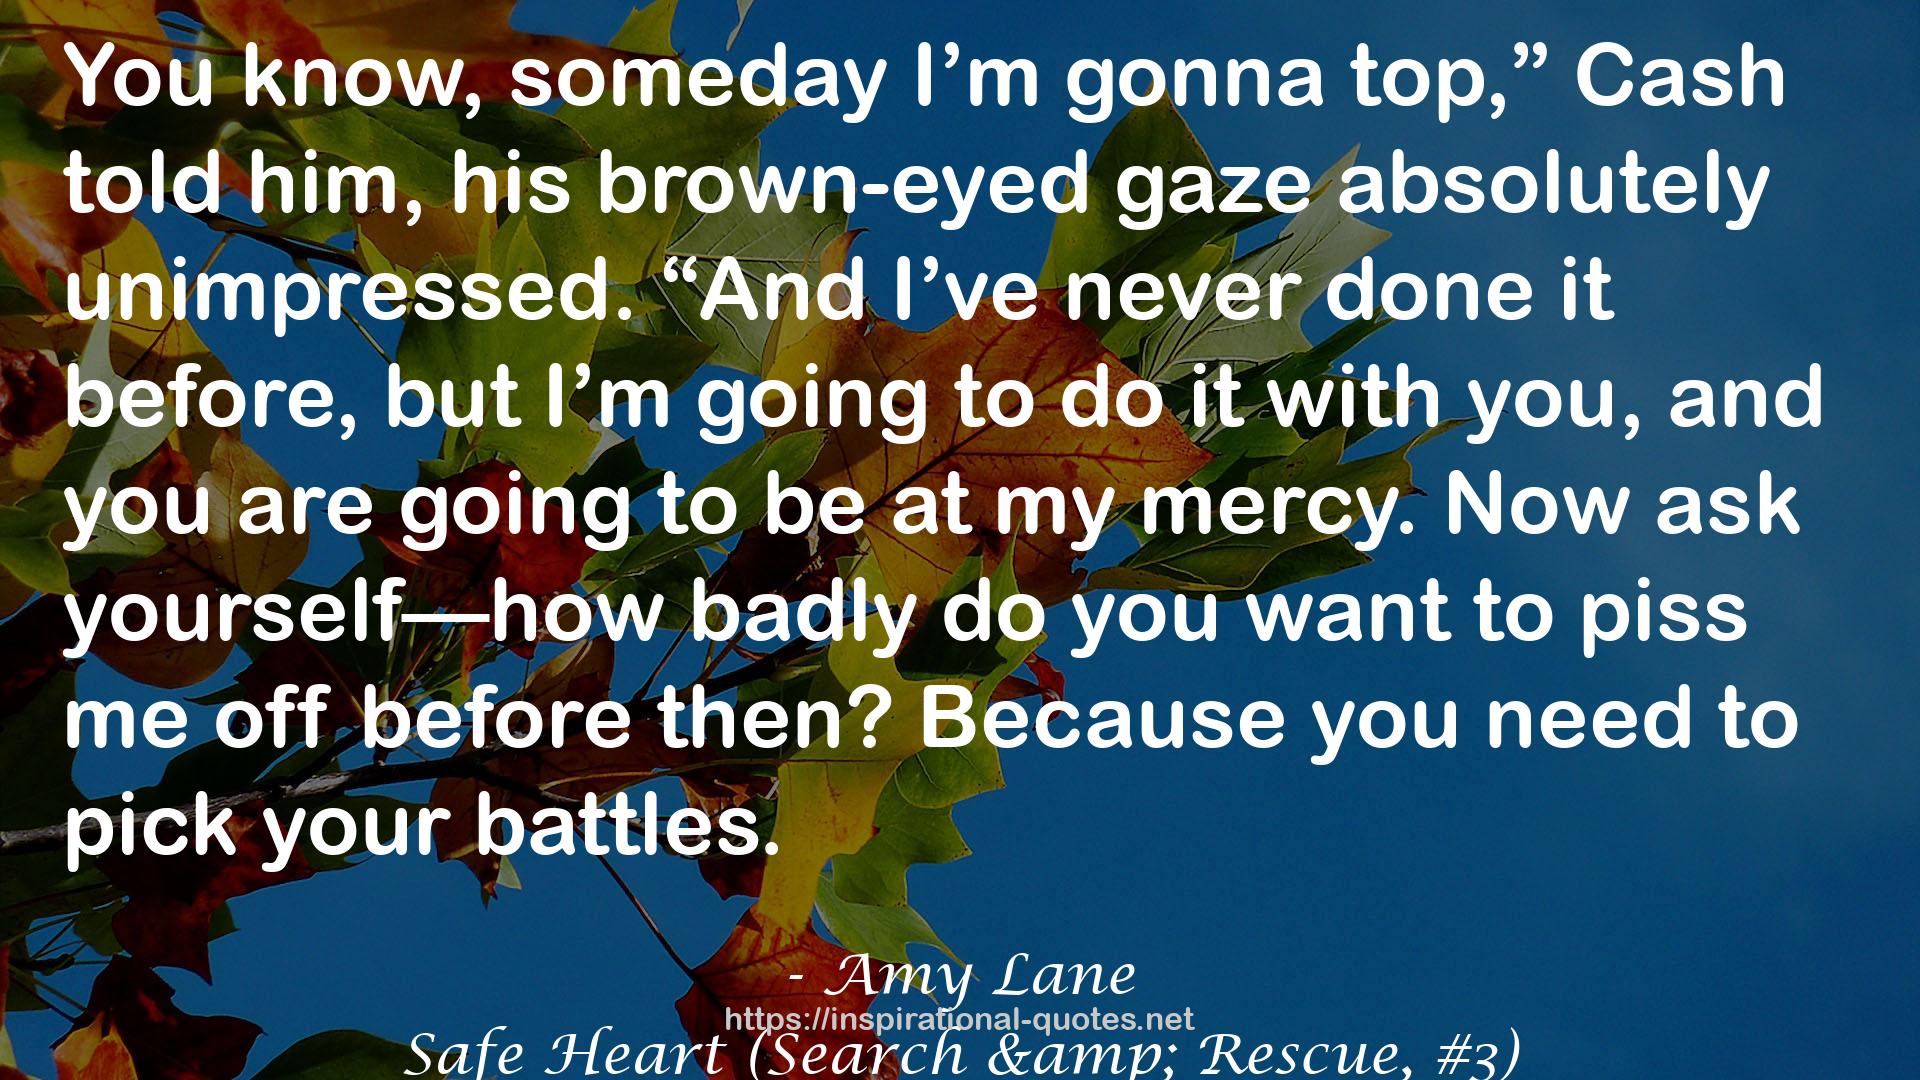 Safe Heart (Search & Rescue, #3) QUOTES